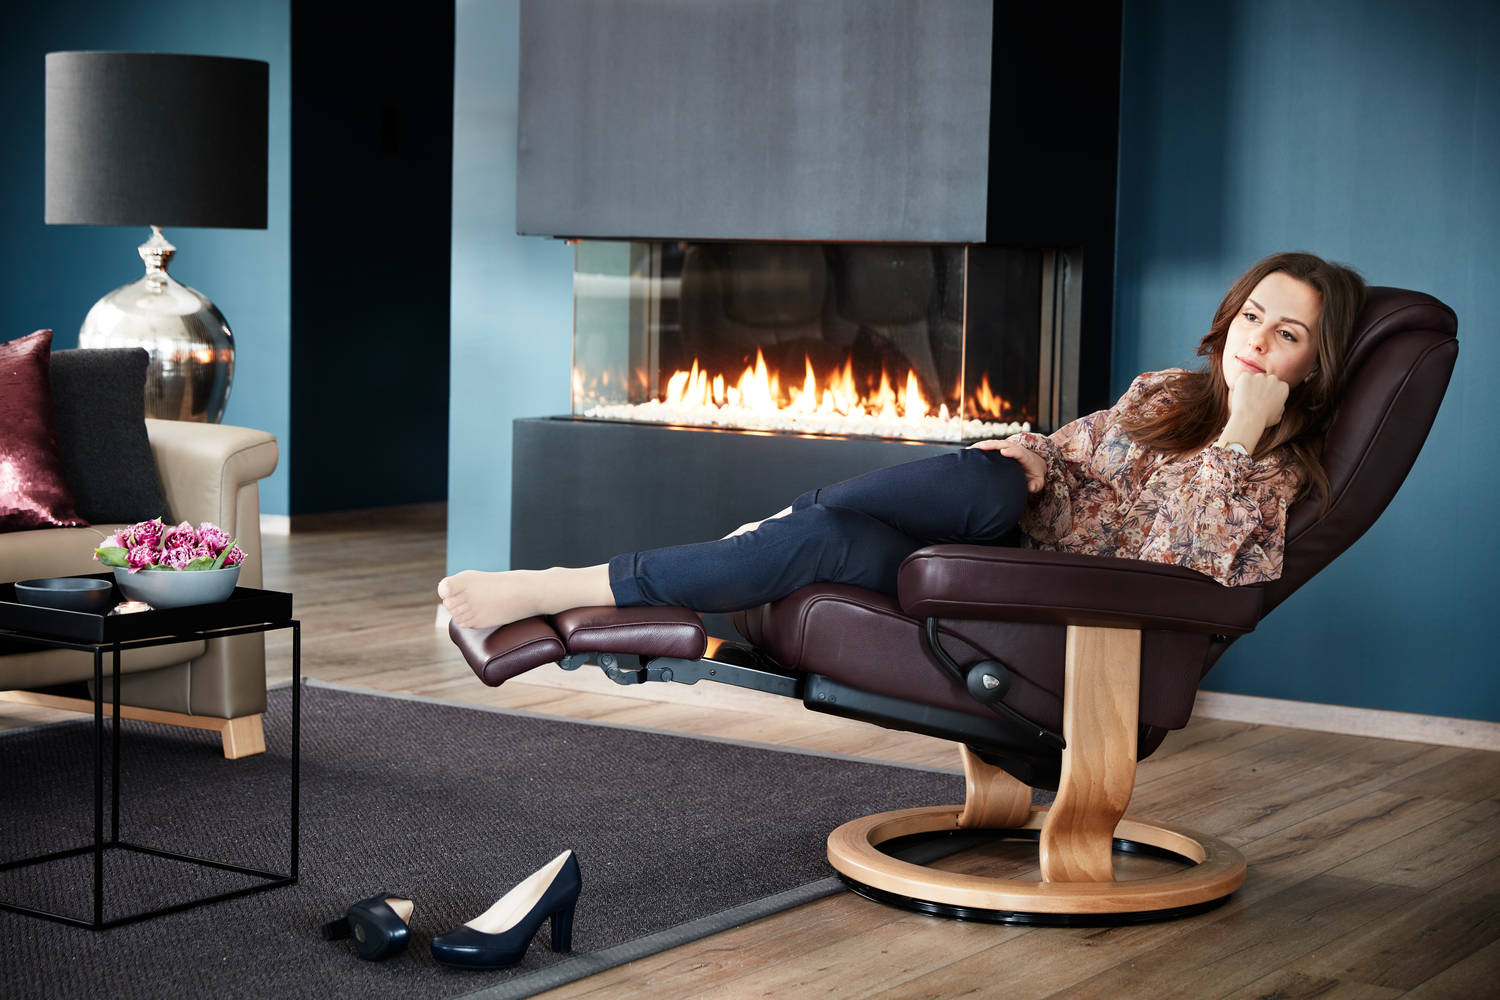 How to Select the Right Stressless Chair for You